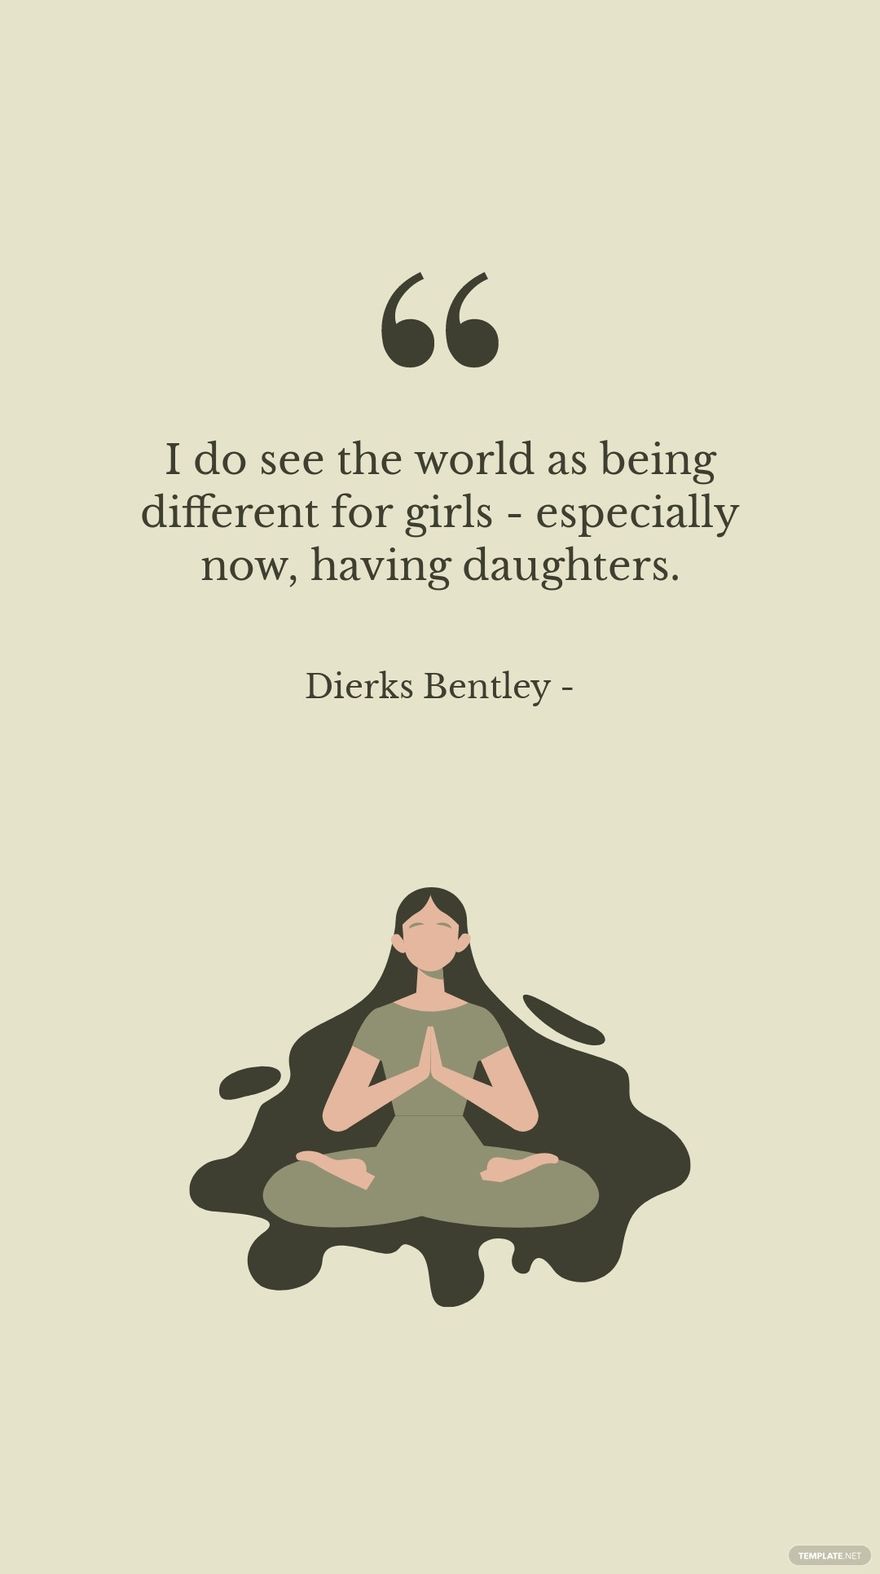 Dierks Bentley - I do see the world as being different for girls - especially now, having daughters.